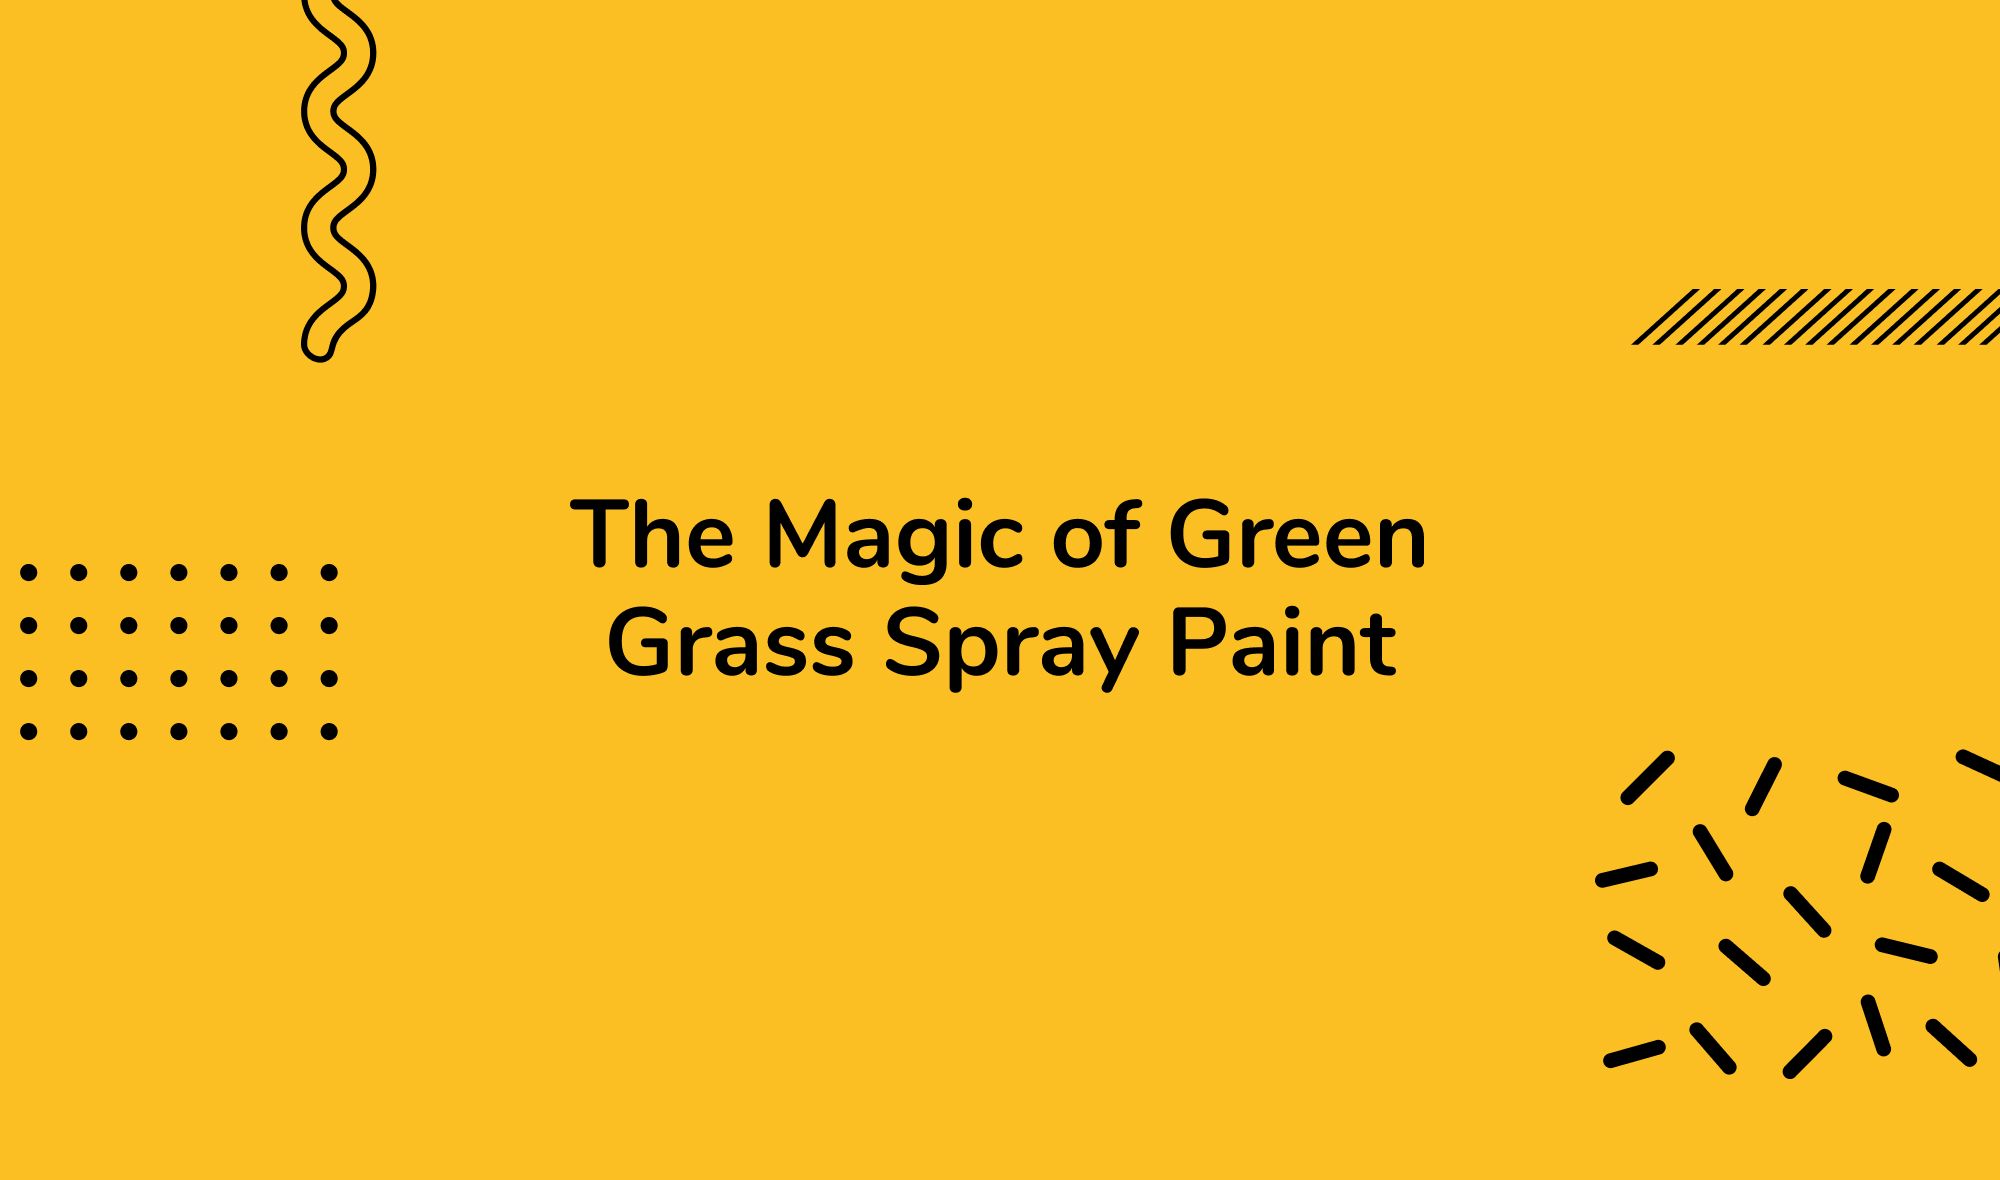 Wrapping It Up: The Magic of Green Grass Spray Paint